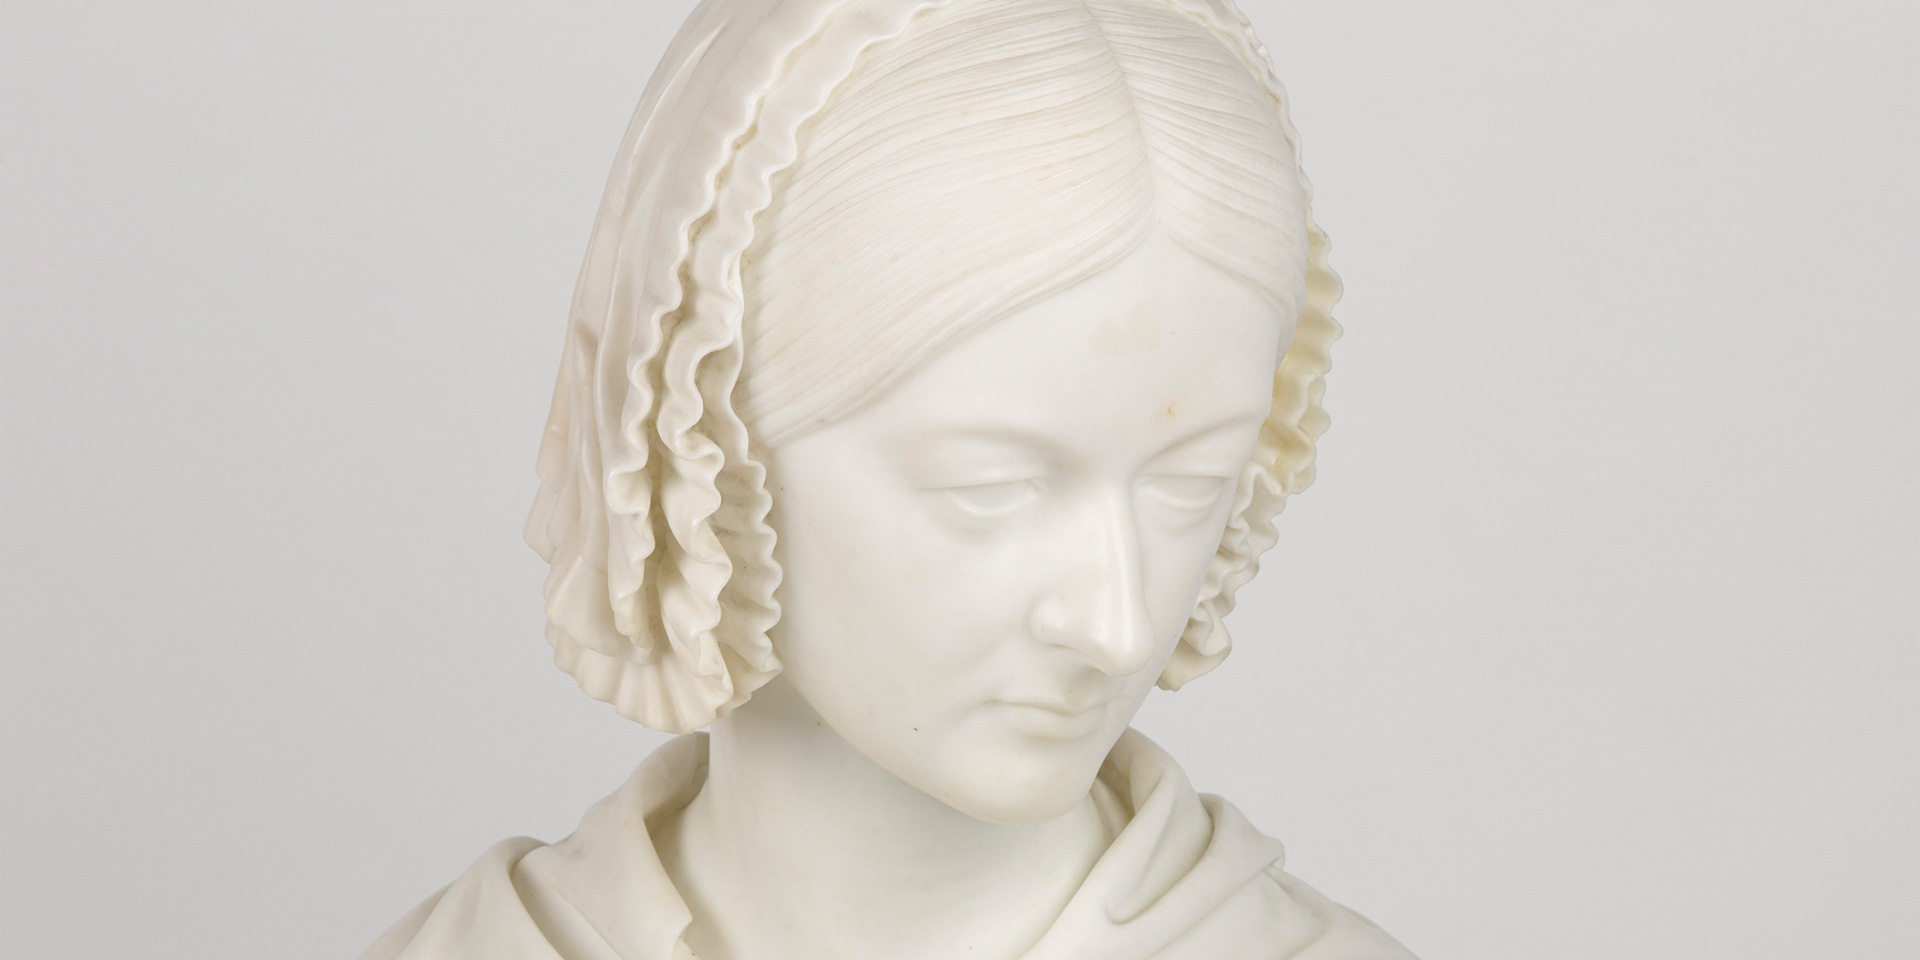 Bust presented to Florence Nightingale by men of the British Army in 1862